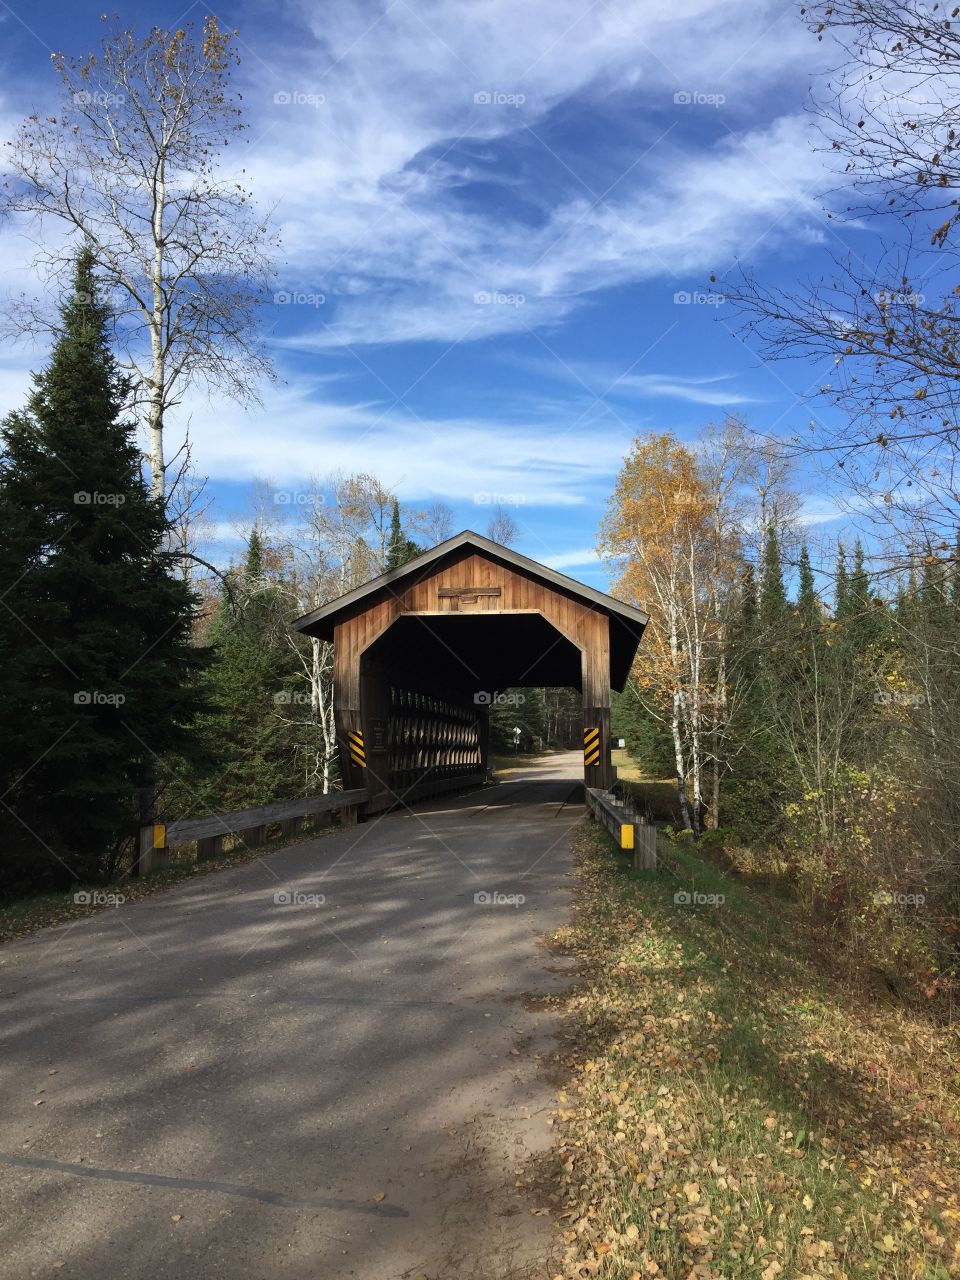 One of the few covered bridges left in Wisconsin.  